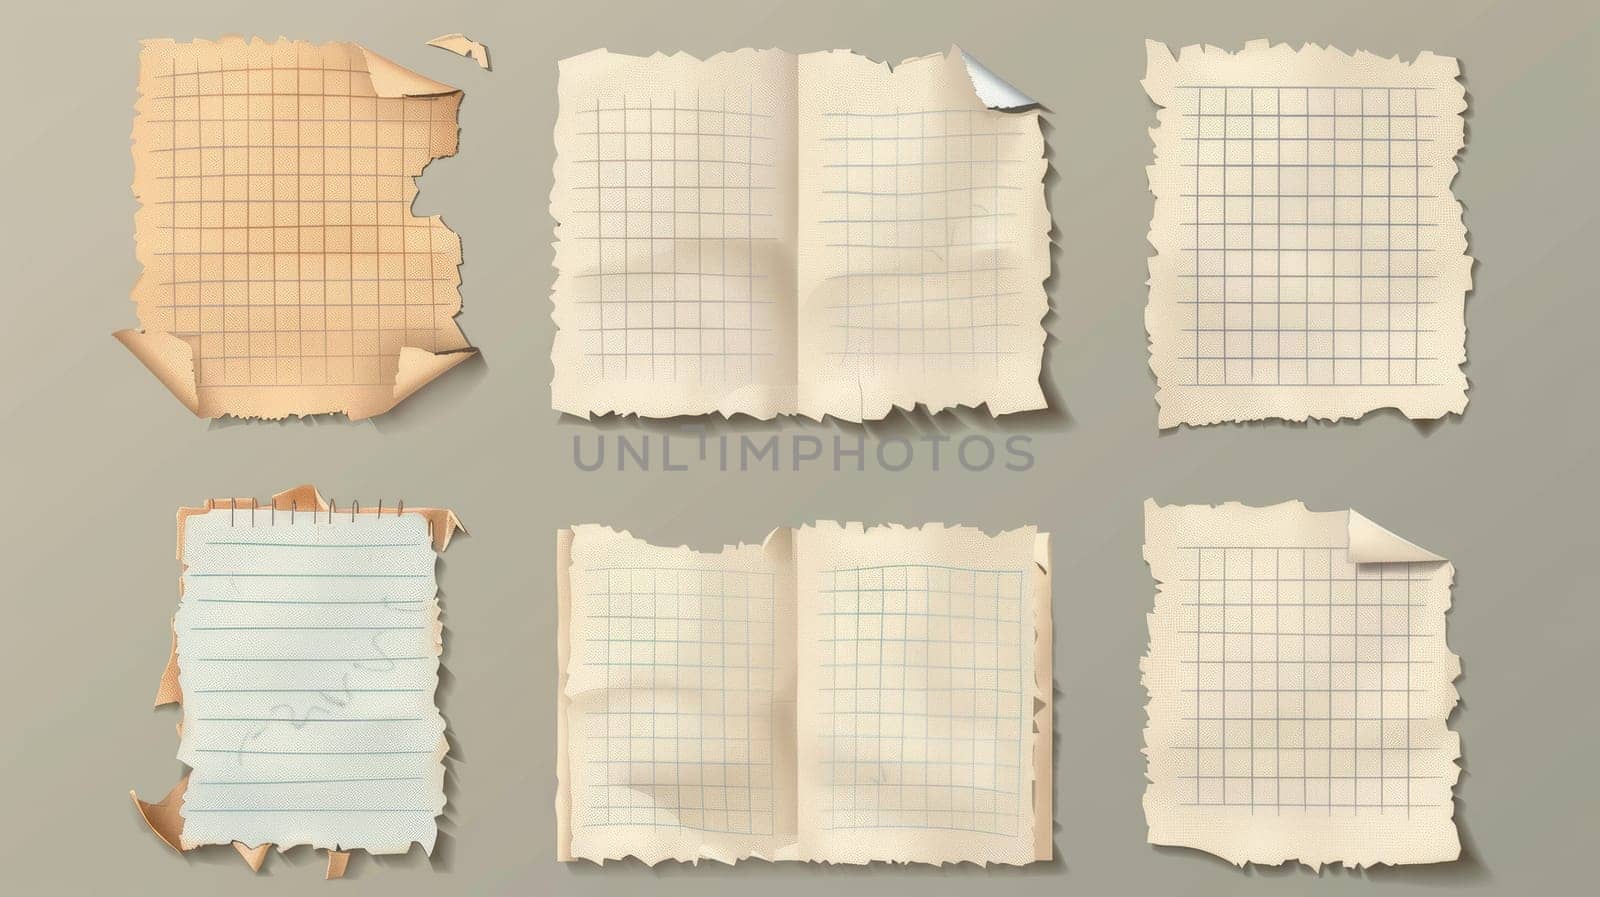 Ripped notepad and copybook pages with square grid and striped pattern. Old blank notepad and copybook pages, modern realistic illustration.